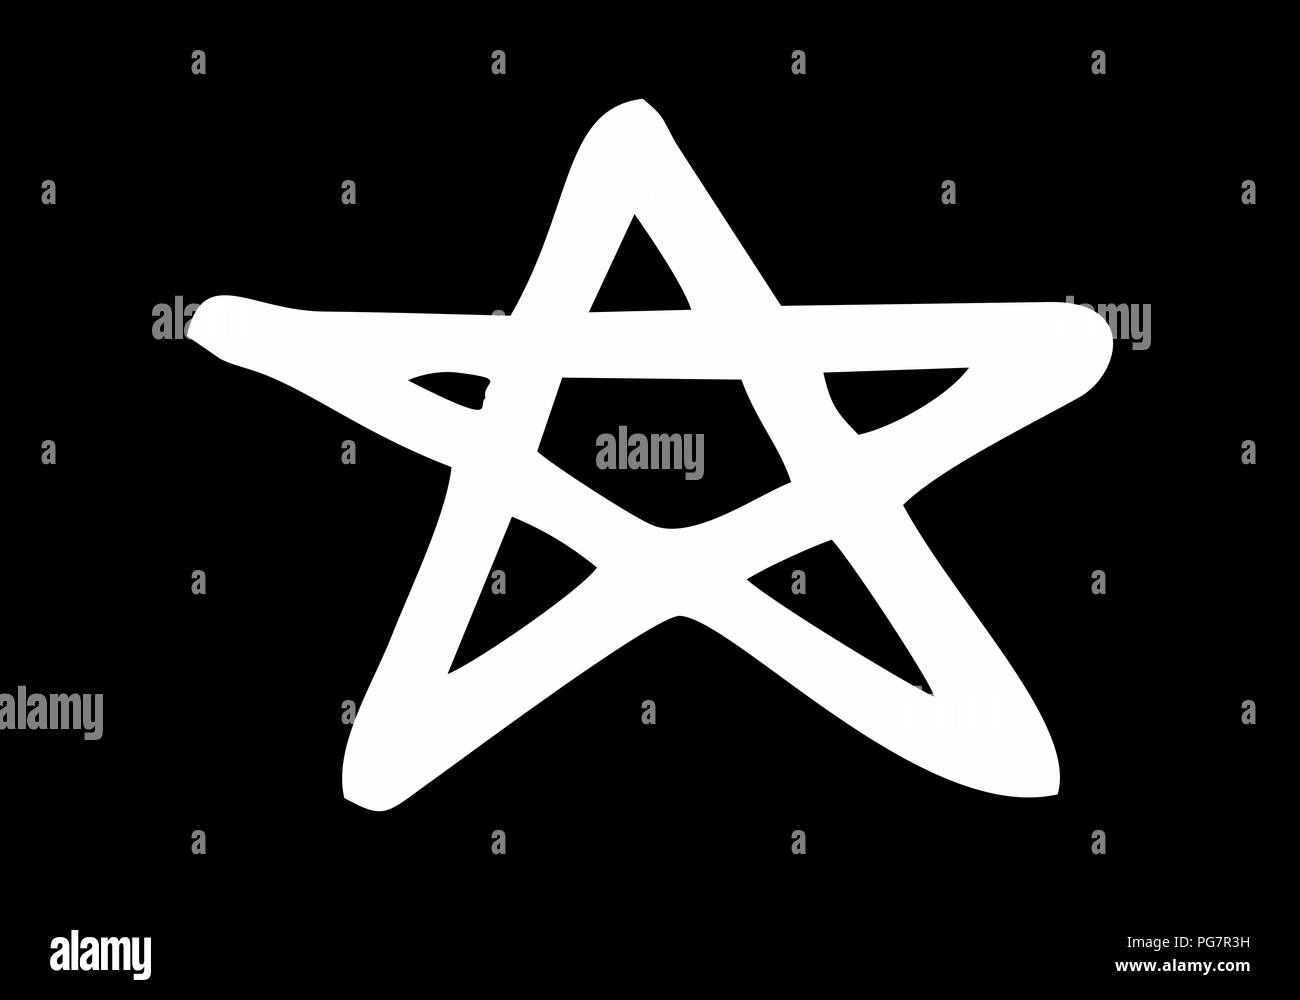 Five pointed star illustration Stock Vector